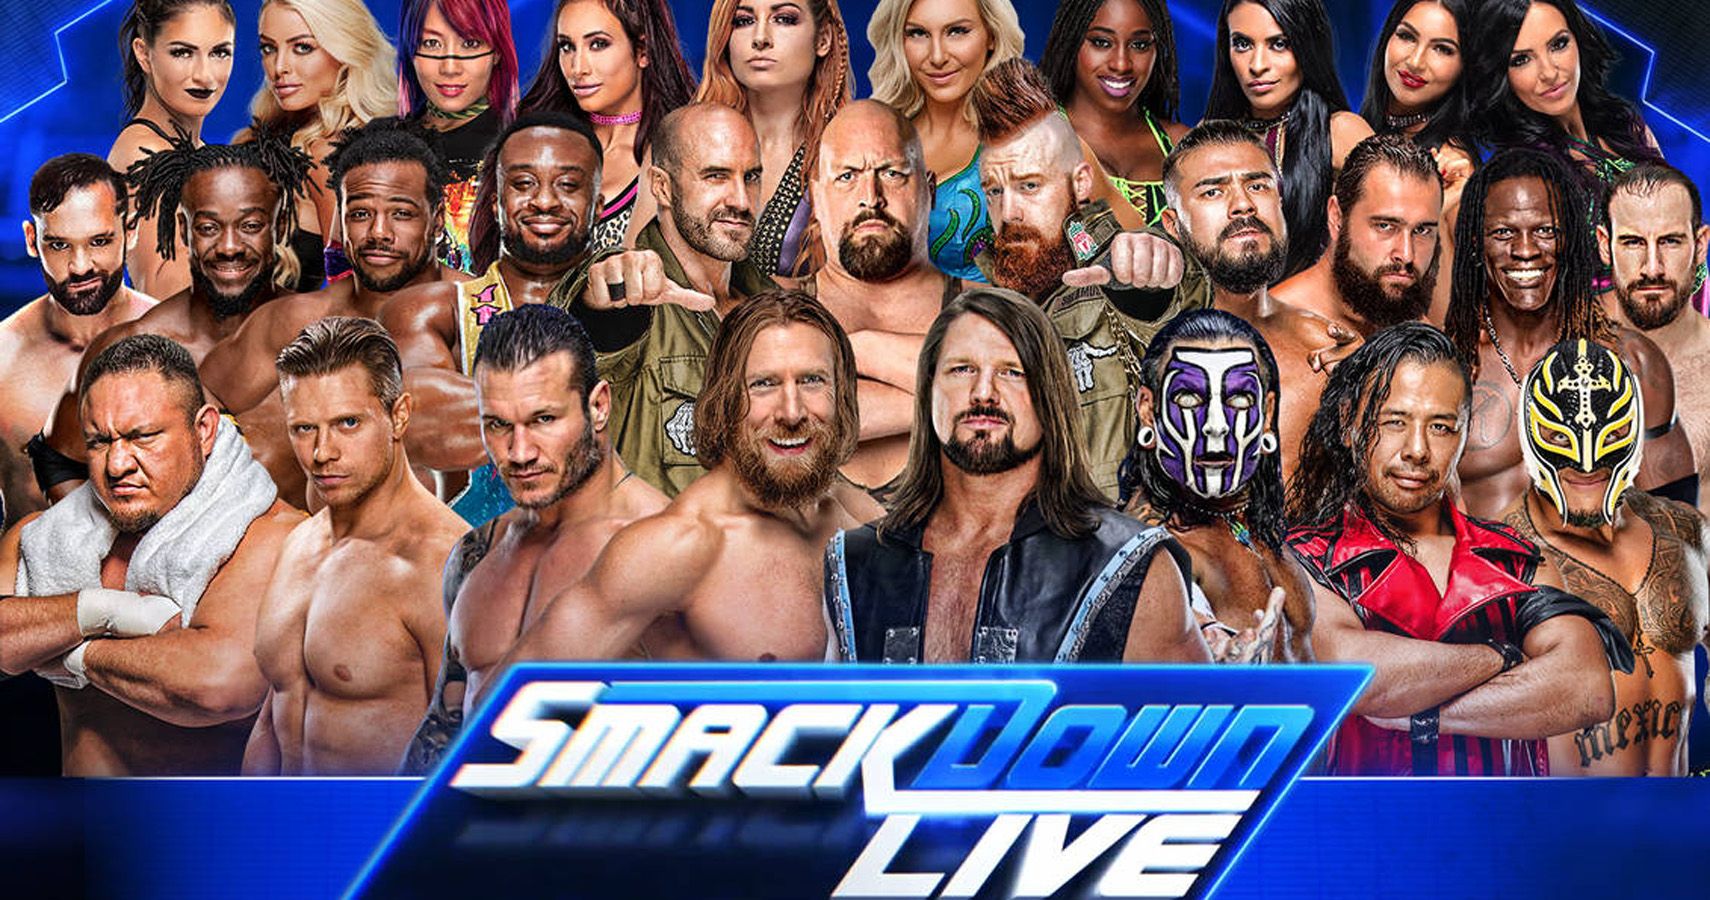 WWE SmackDown: 10 Changes We Expect When It Moves To Fox